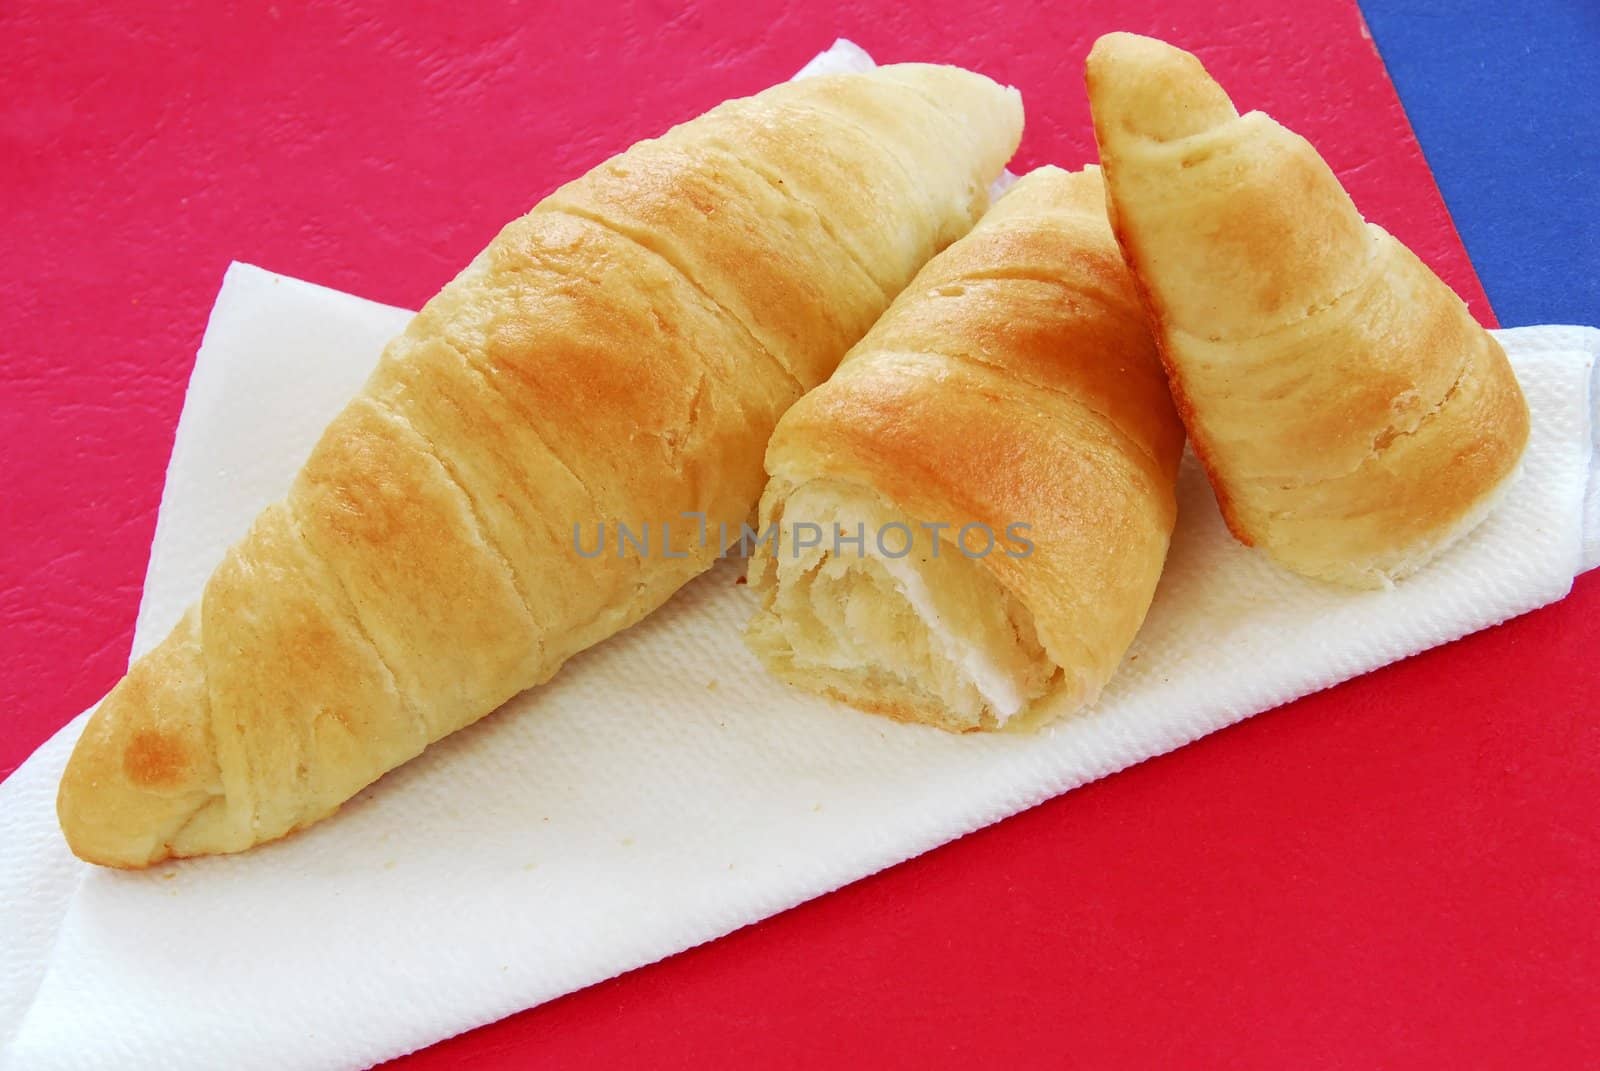 Homemade pastry by simply